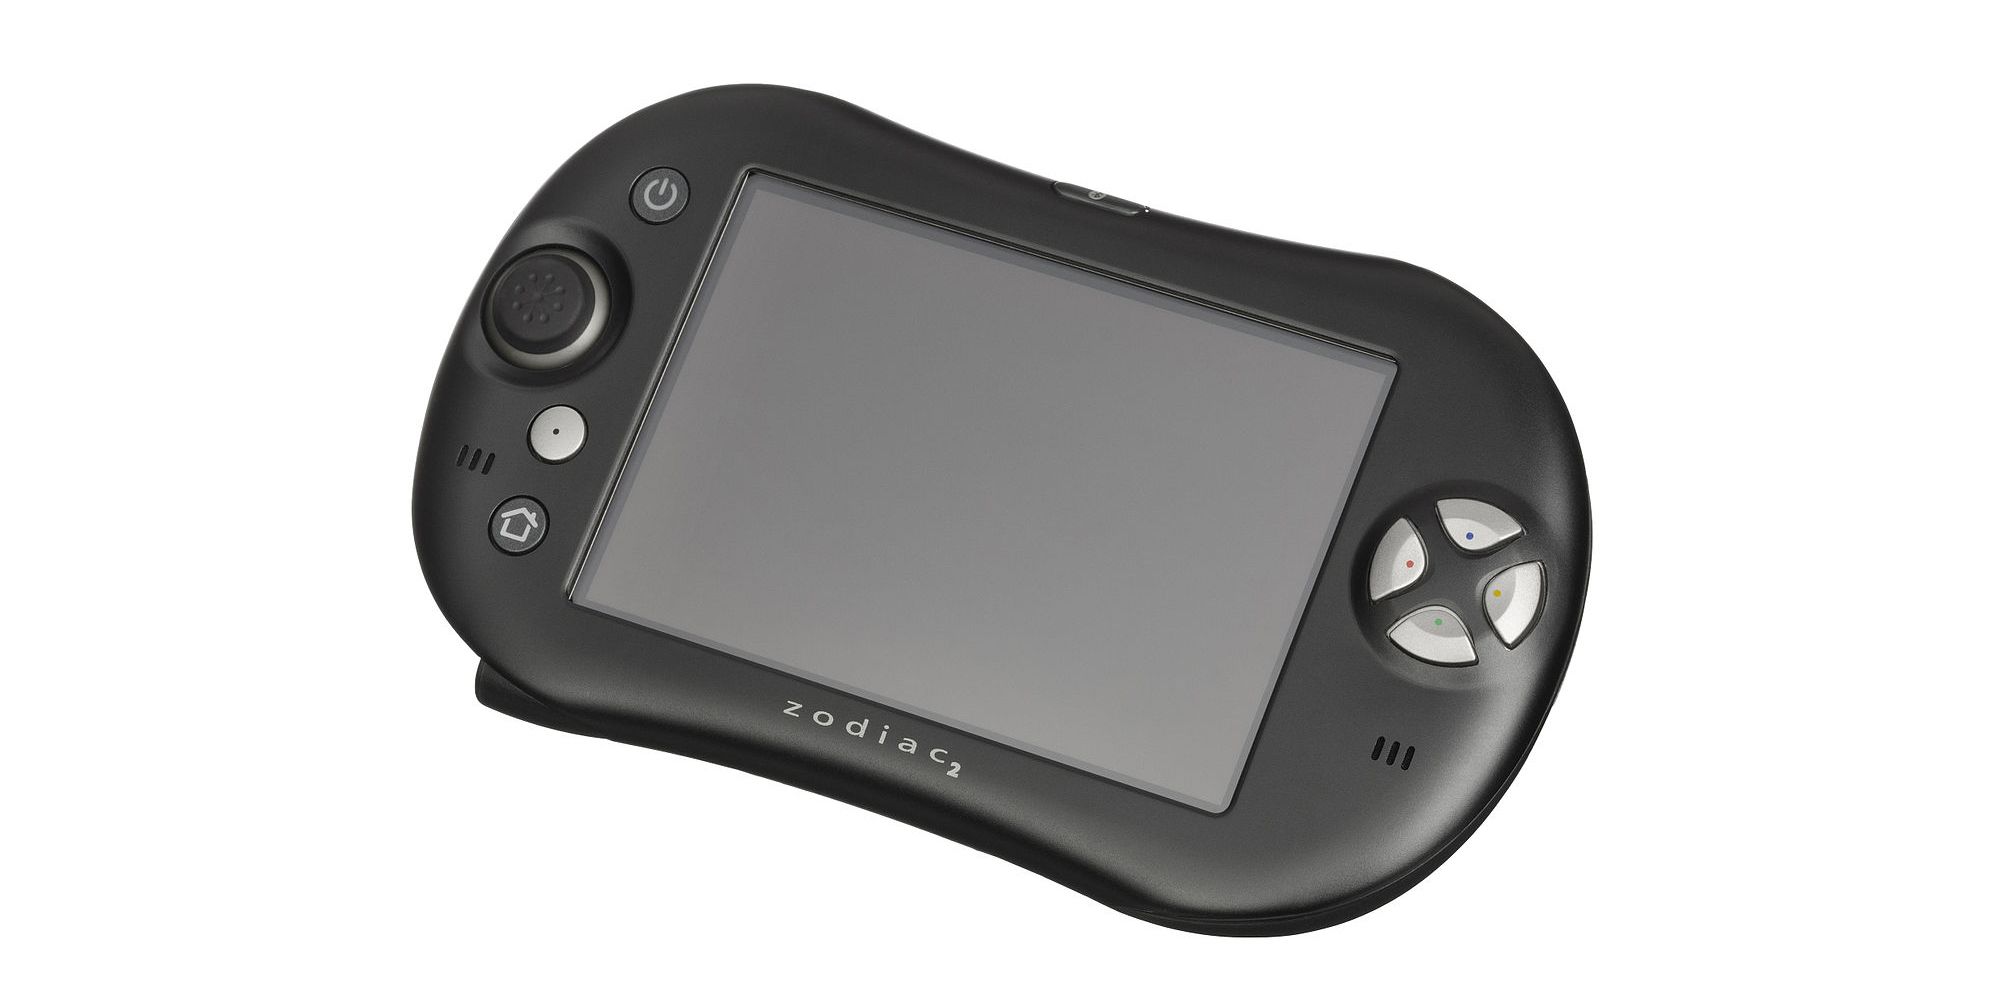 A photo showing the Tapwave Zodiac game console